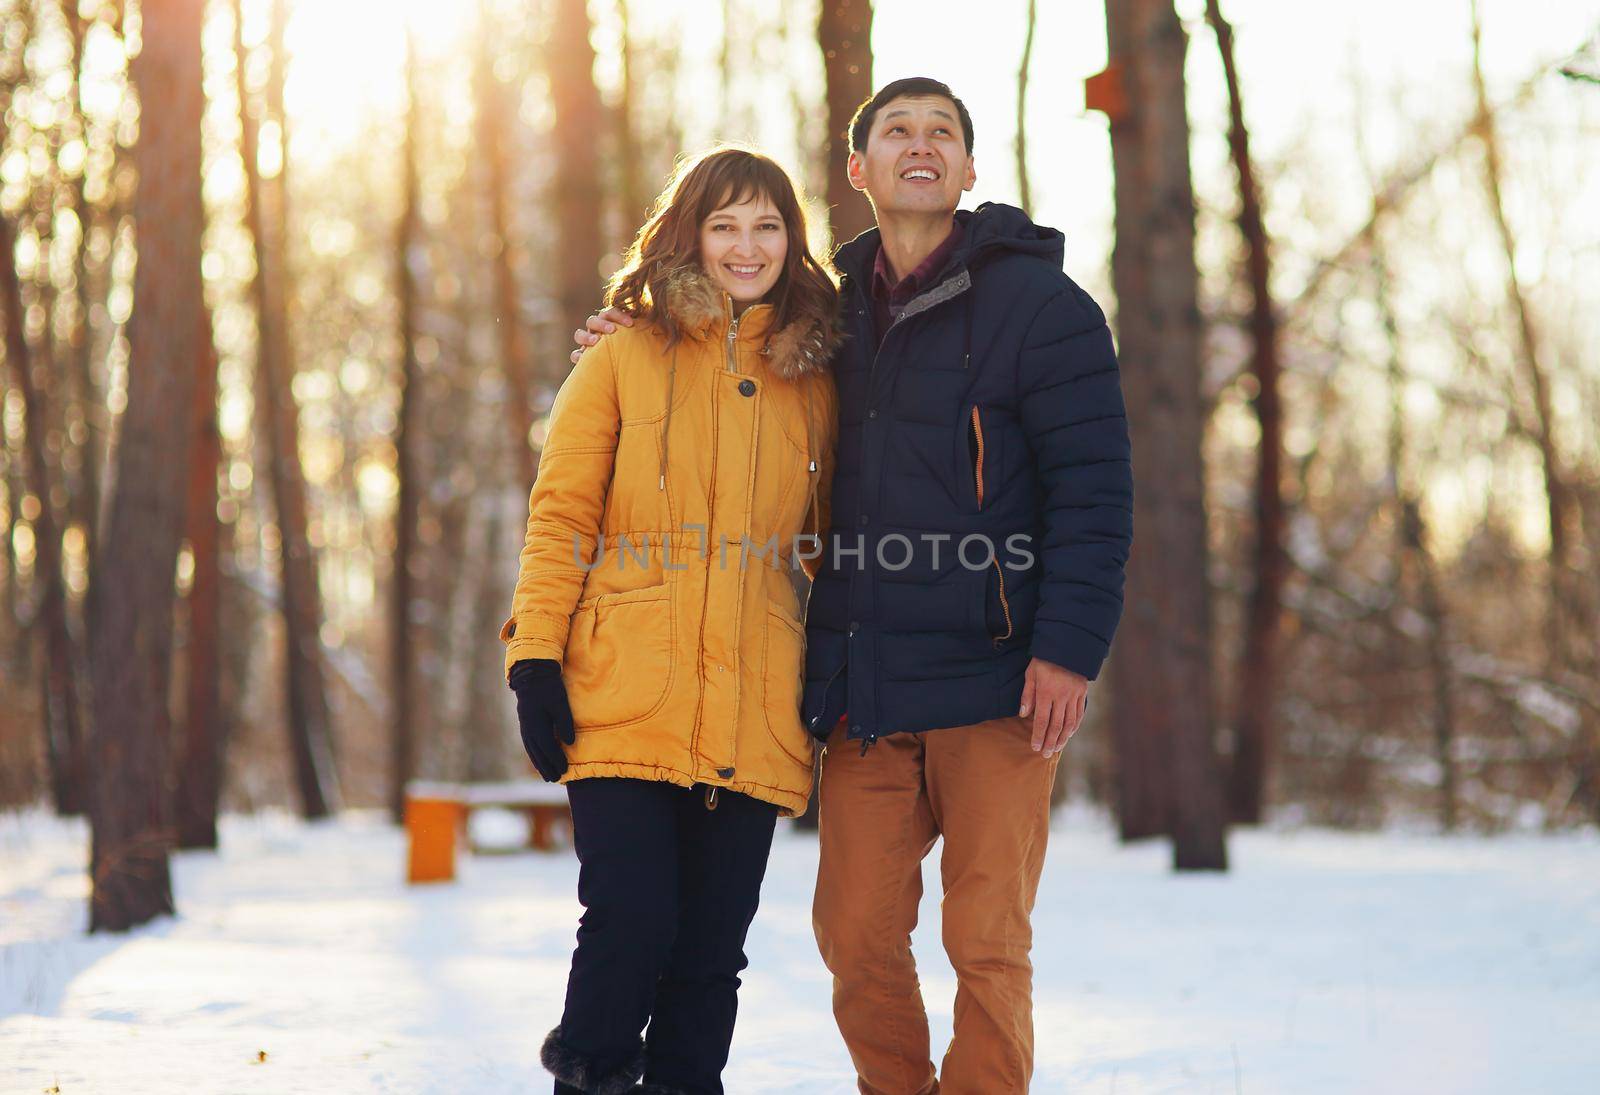 Warm winter portrait of a couple of different race in the forest.